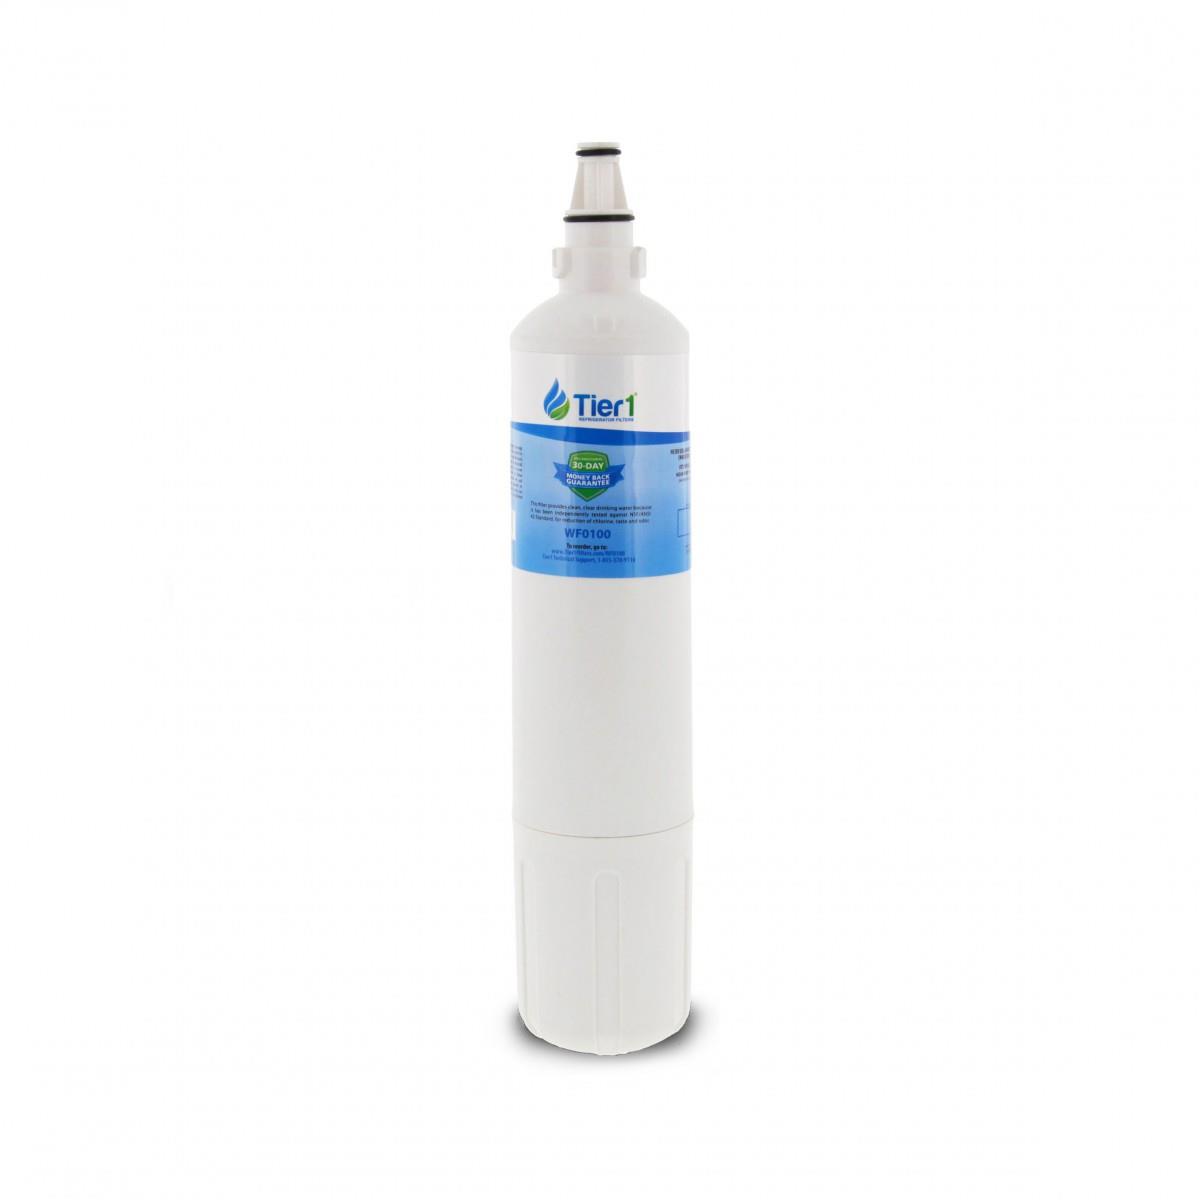 Picture of Commercial Water Distributing TIER1-US-WF0100 3M Aqua-Pure Easy C-Complete Under Sink Filter System